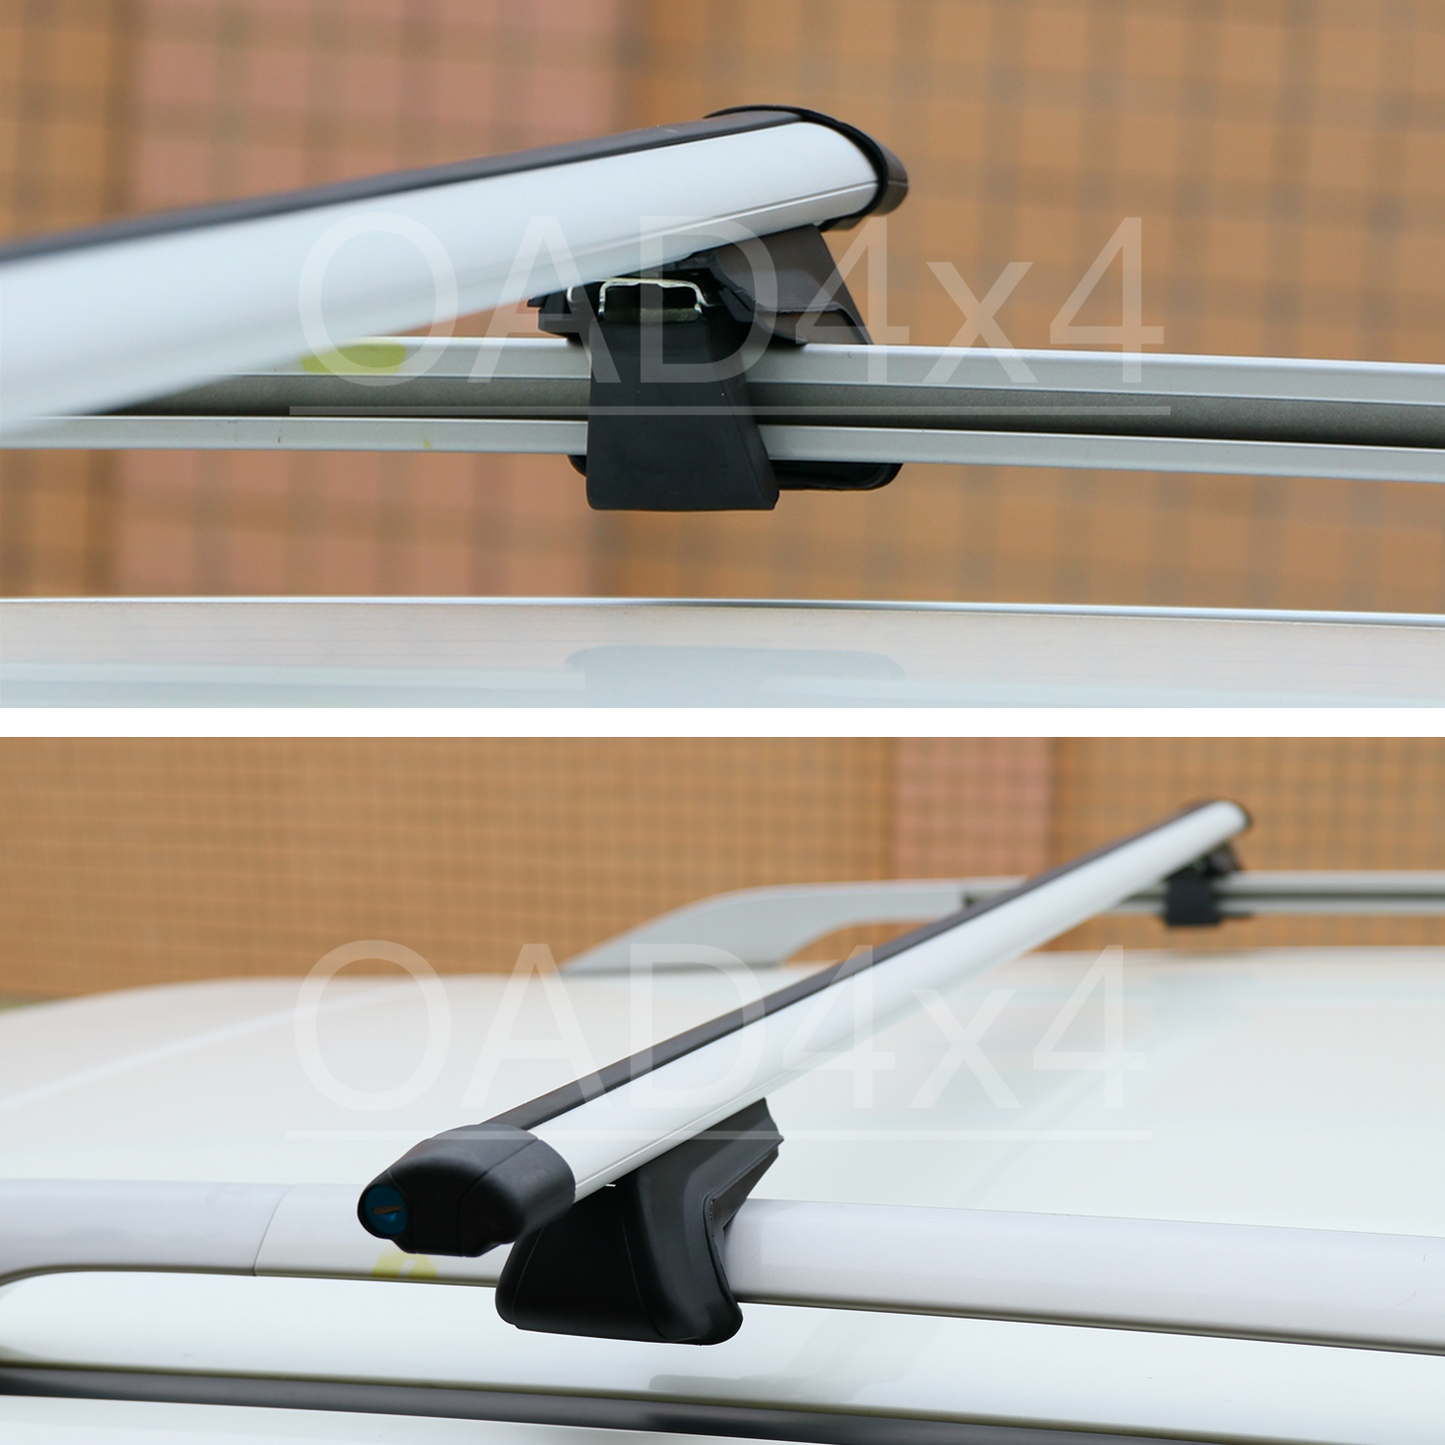 1 Pair Aluminum Silver Cross Bar Roof Racks Baggage holder for Subaru 5gen Outback 14-20 with raised roof rail